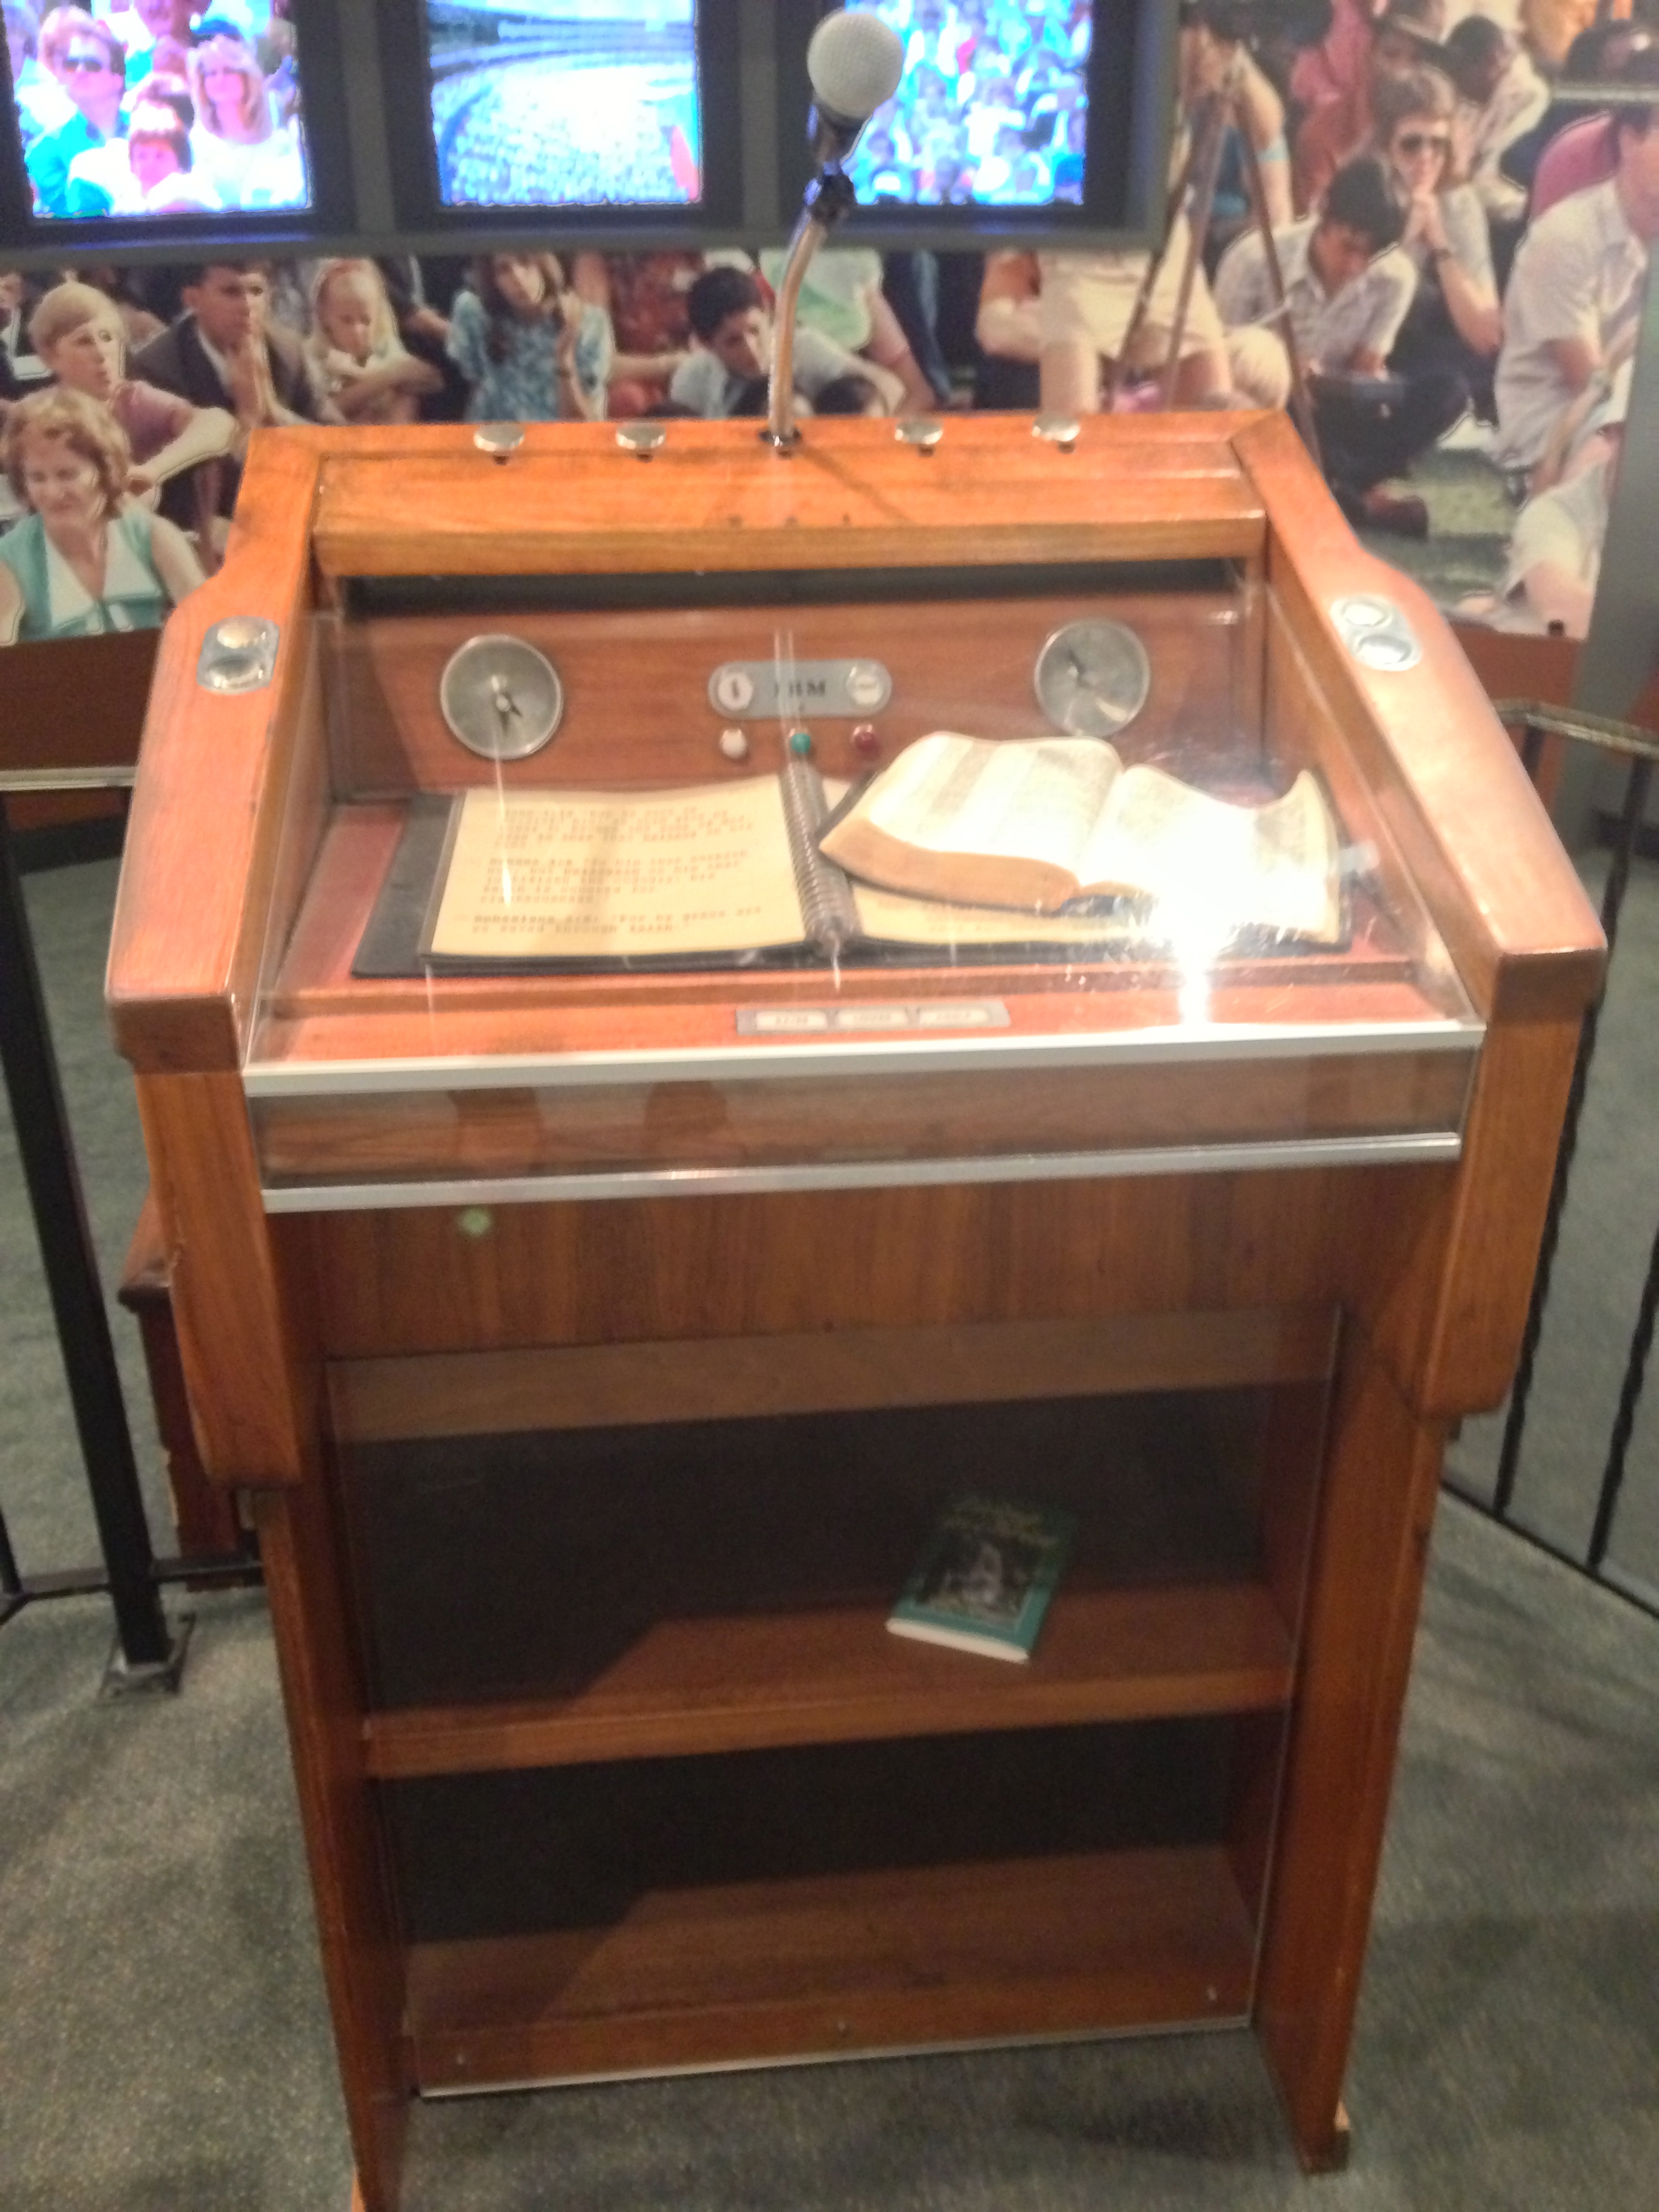 Billy Graham's pulpit that was shipped around the world and used at his evangelistic campaigns